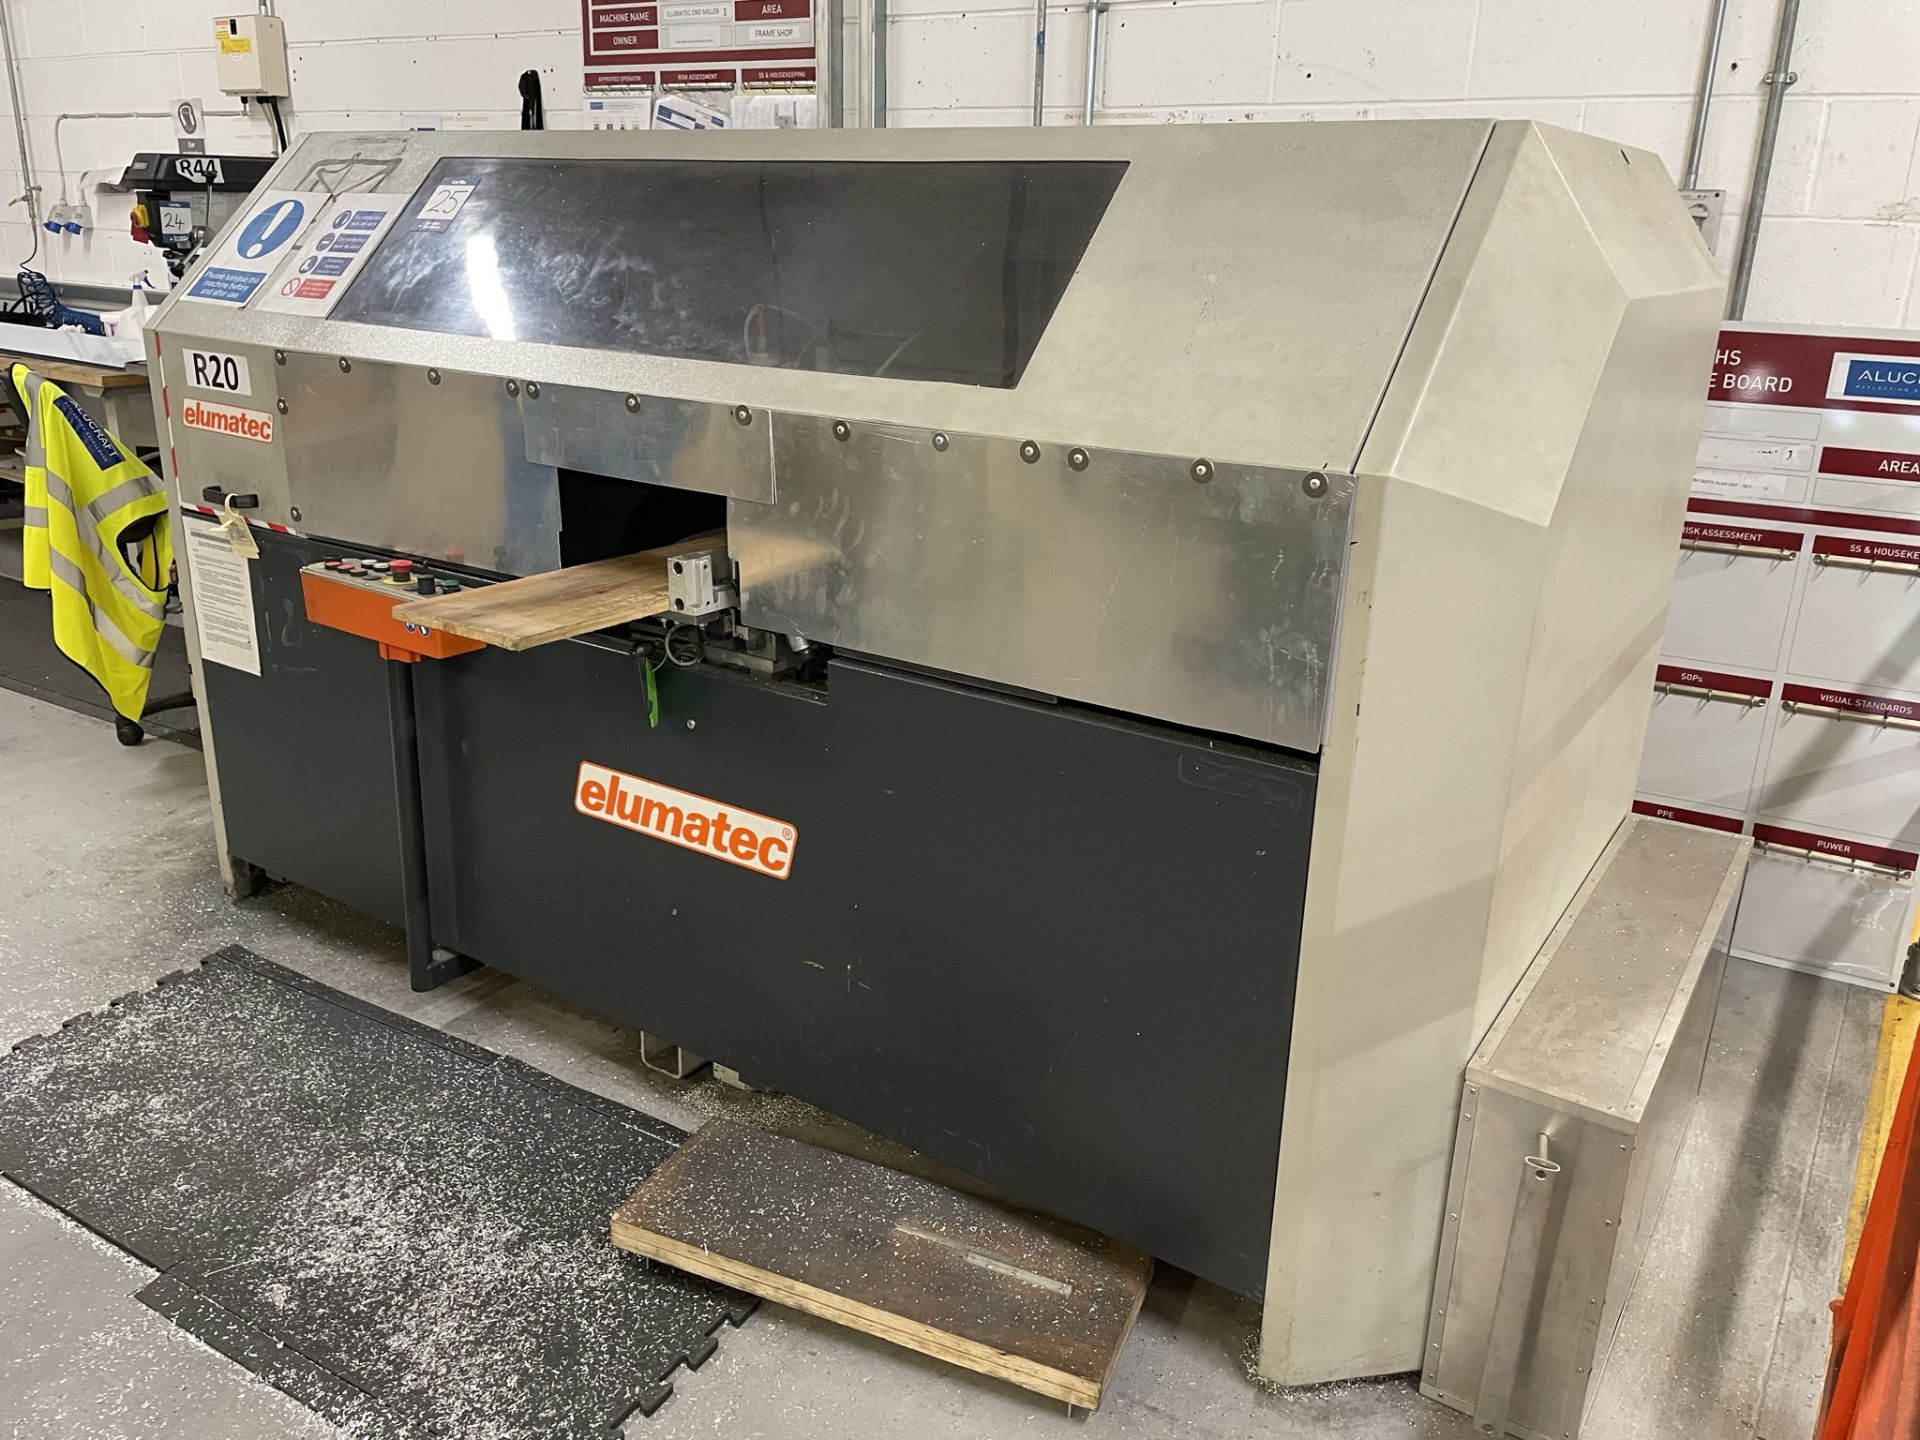 Elumatec, AKS134 twin head end miller notching saw, Serial No. 1340020634 (DOM: 2009) - Image 2 of 6